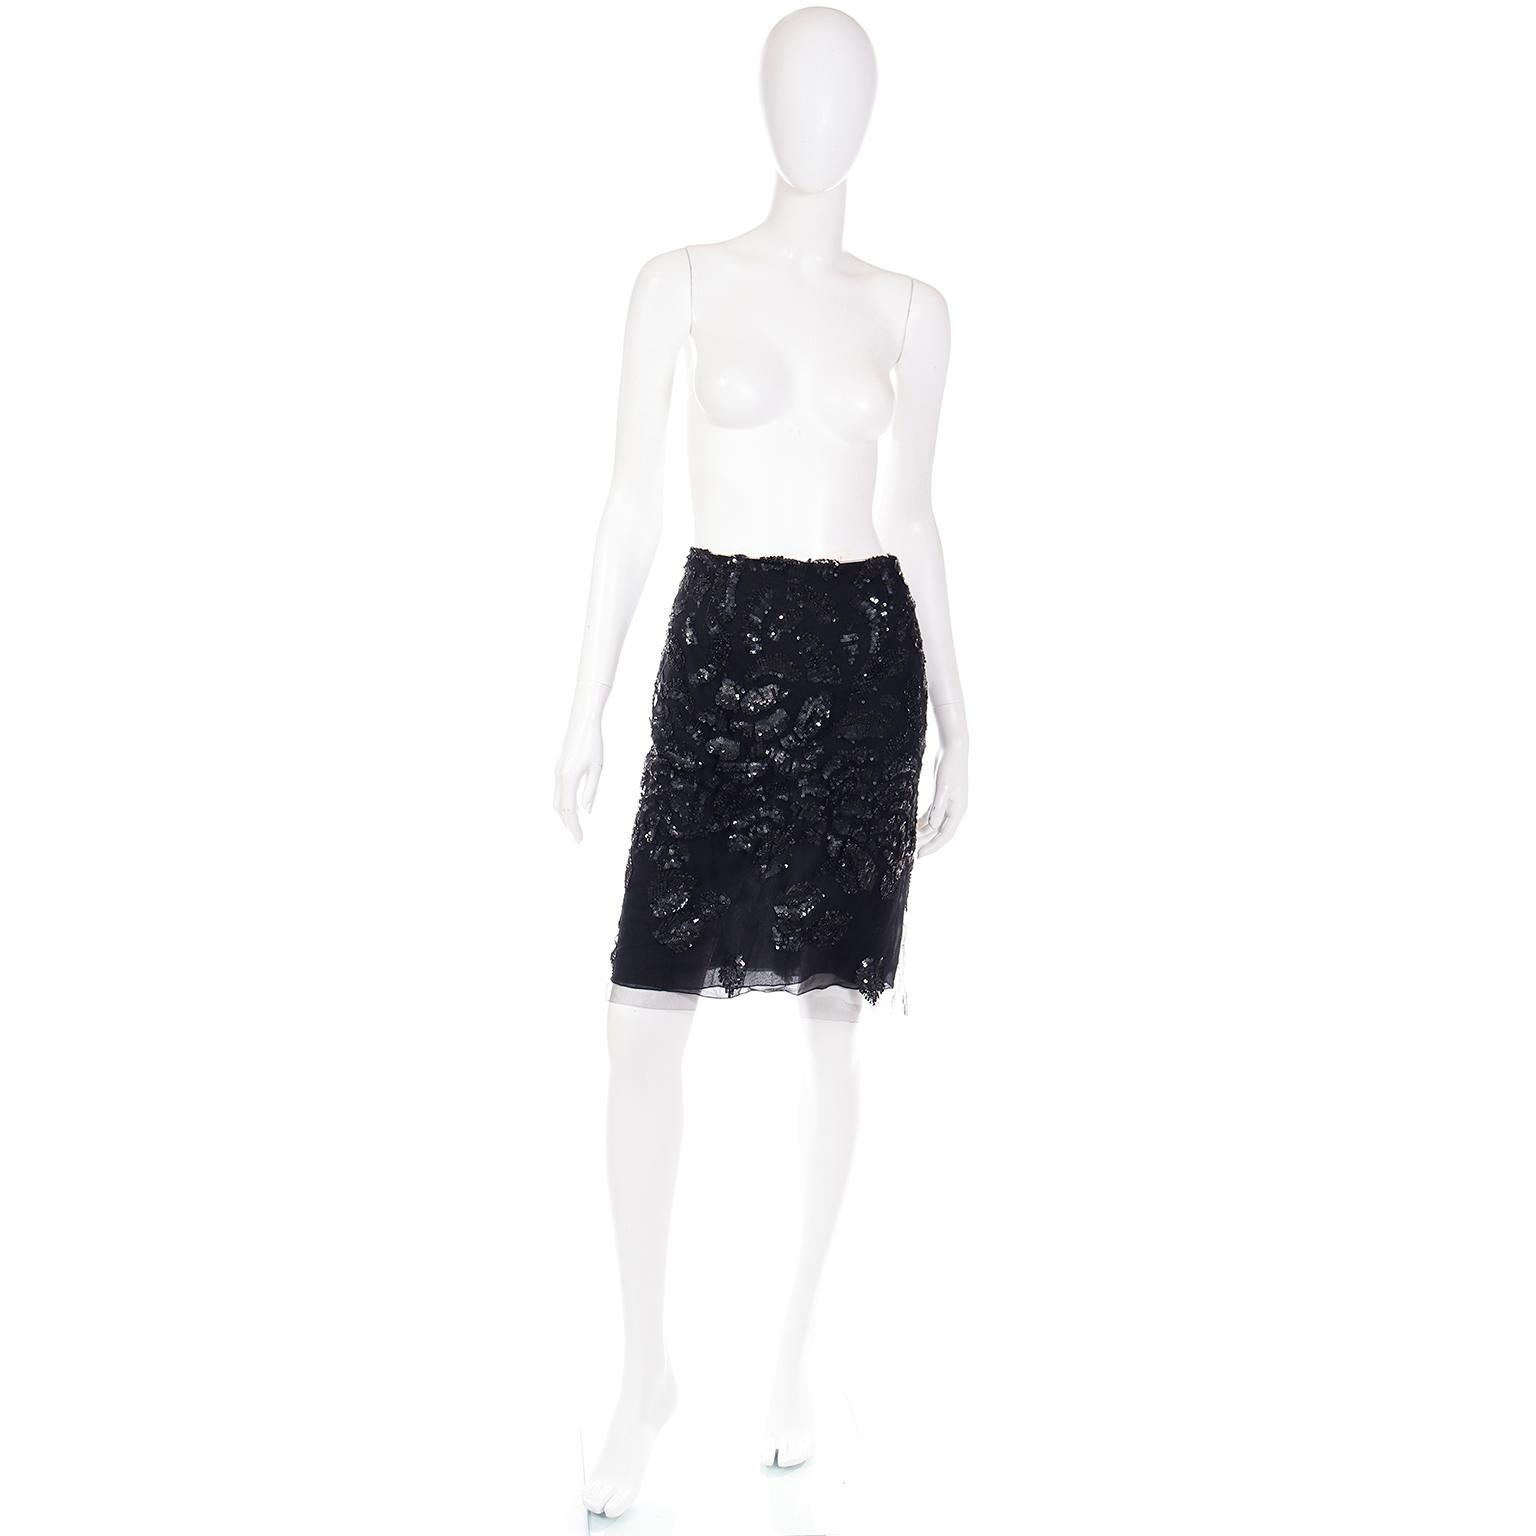 This is an exquisite Fall/Winter 2000 Valentino Garavani black silk skirt with a mesh overlay. This stunning skirt is beautifully embellished with stacked black sequins in the shapes of feathers or leaves. This skirt closes with a left side zipper.